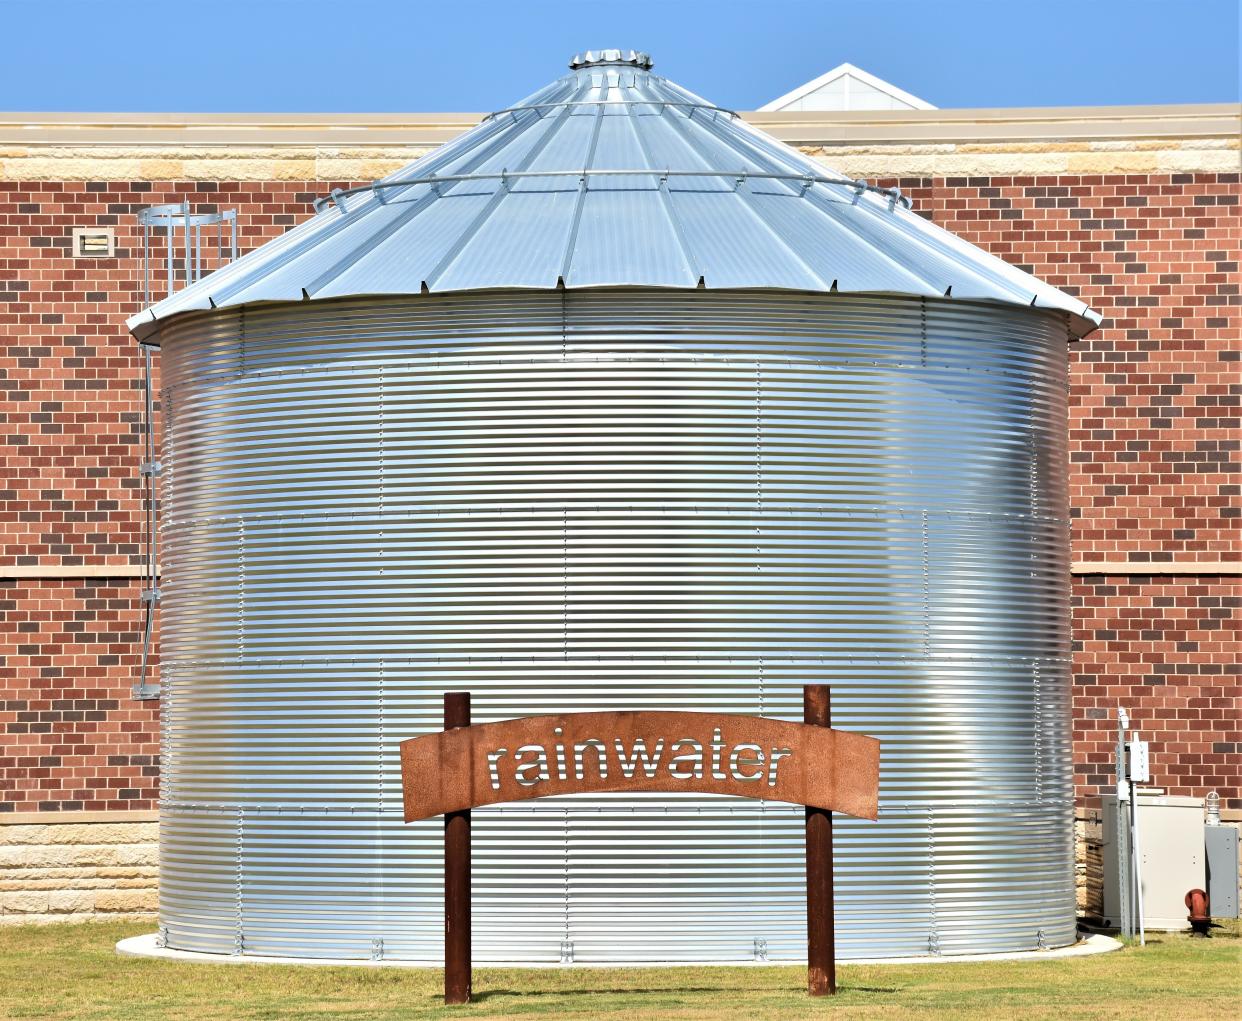 According to the Texas Water Development Board, an efficient rainwater collection system can capture roughly 1,000 gallons for every inch of rainfall that falls on a 2,000 square-foot roof.